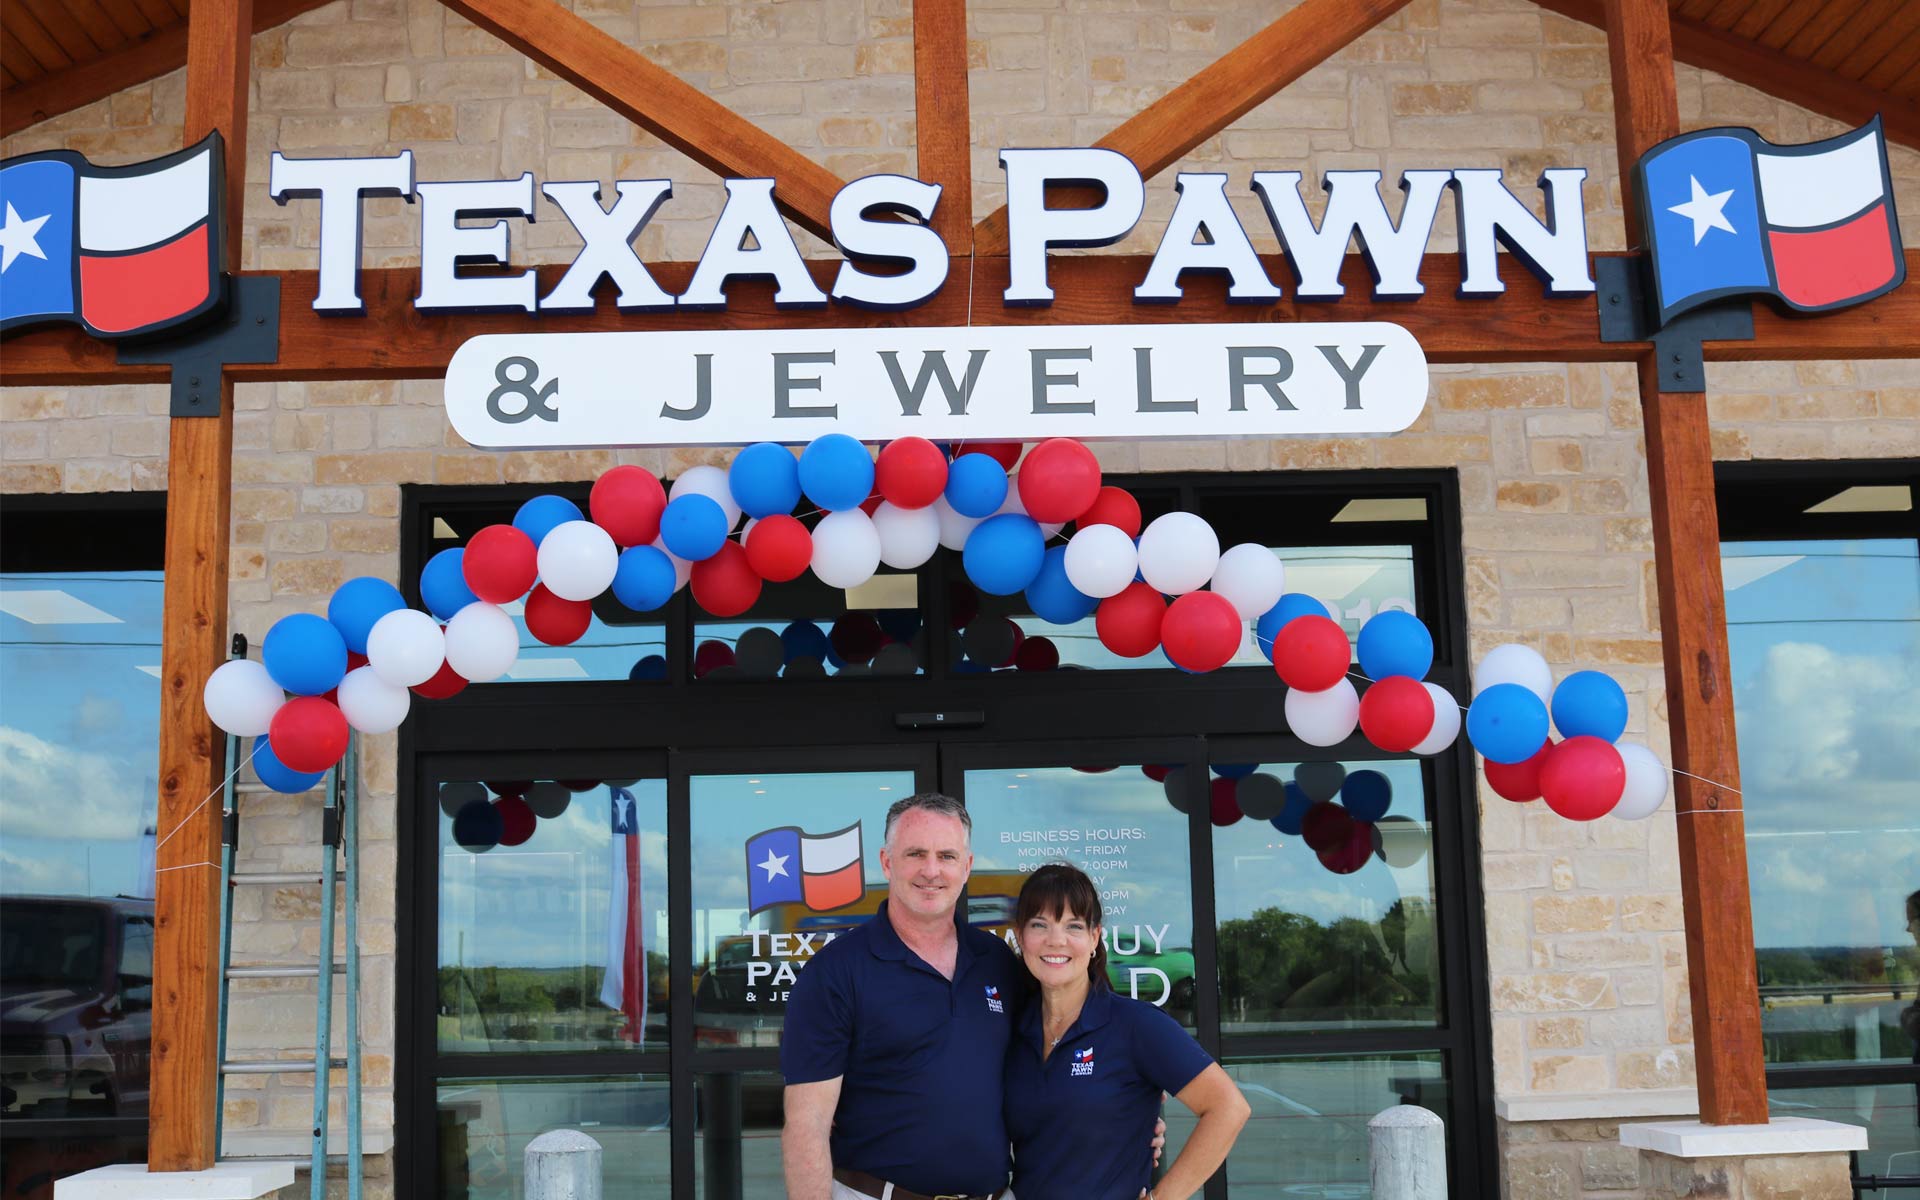 About Texas Pawn and Jewelry